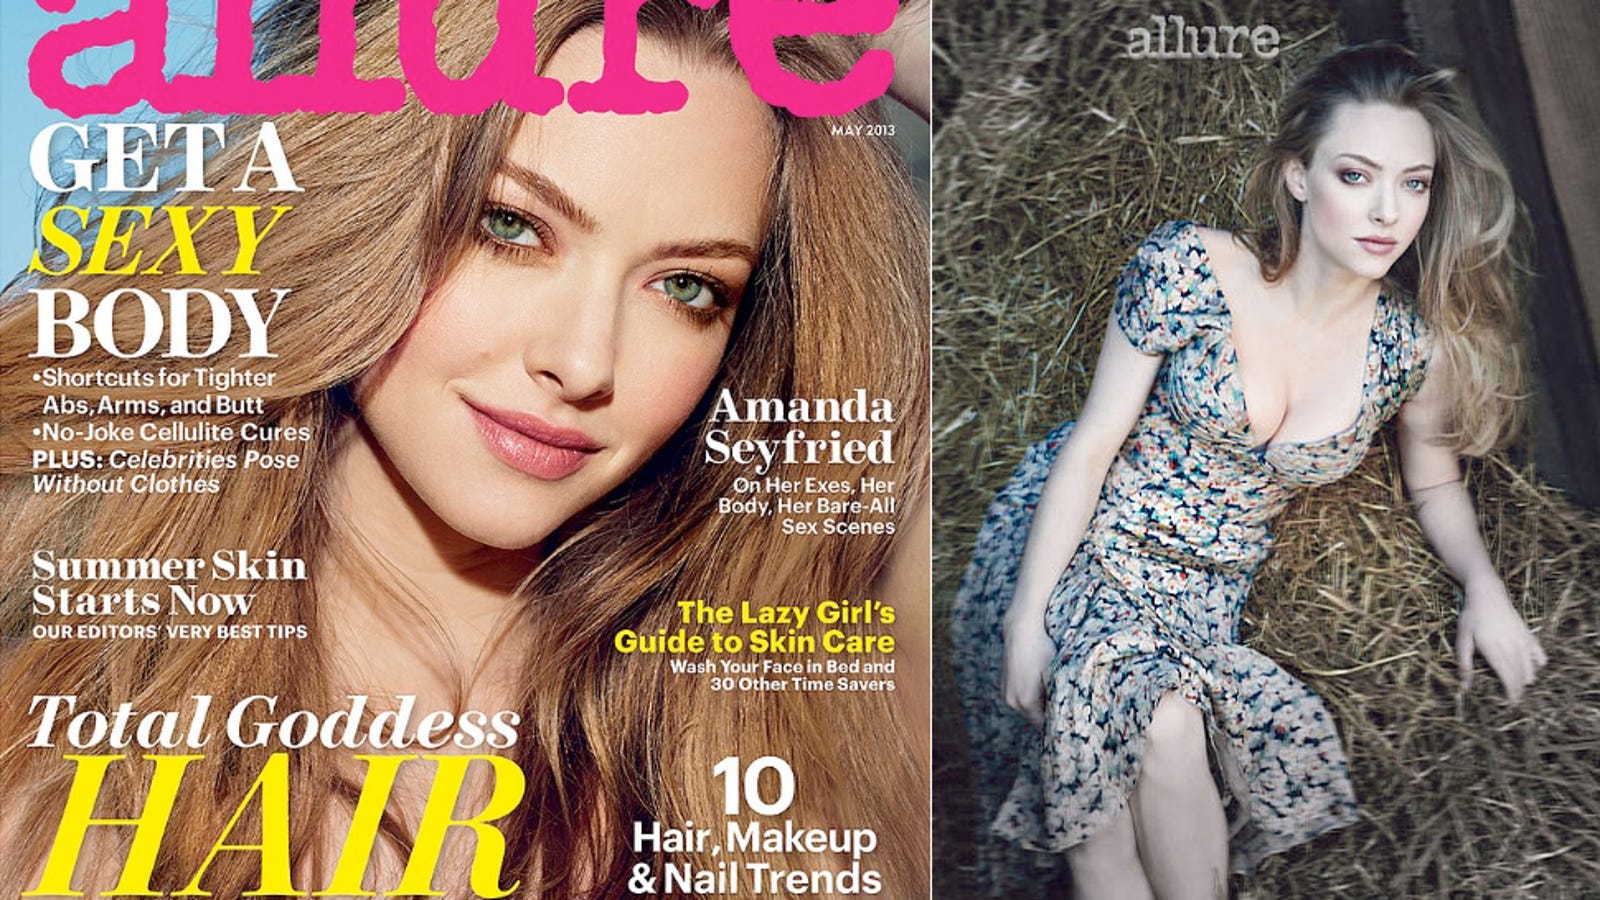 Amanda Seyfrieds breasts shrink from a D to a small C 